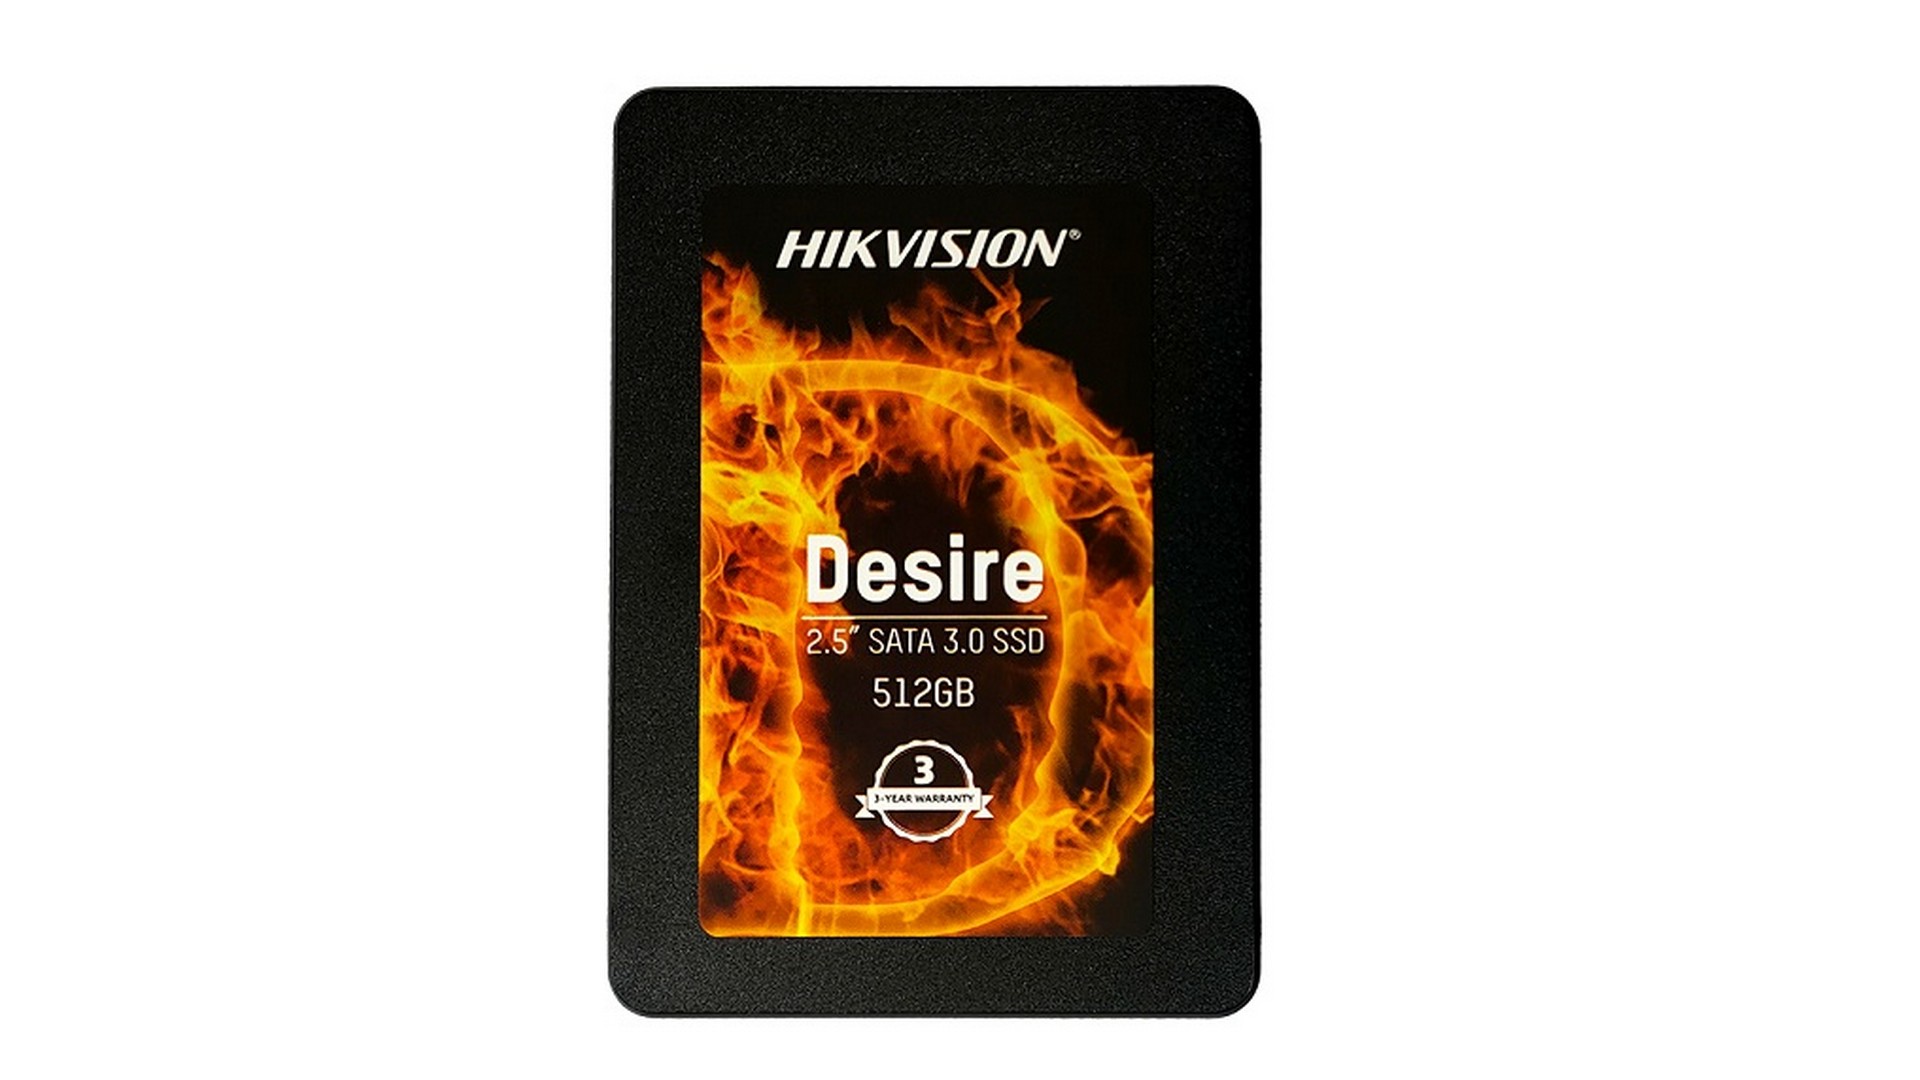 Ổ cứng SSD Hikvision HS Desire 512GB (2.5" | SATA 3 | 550/430 MBs)